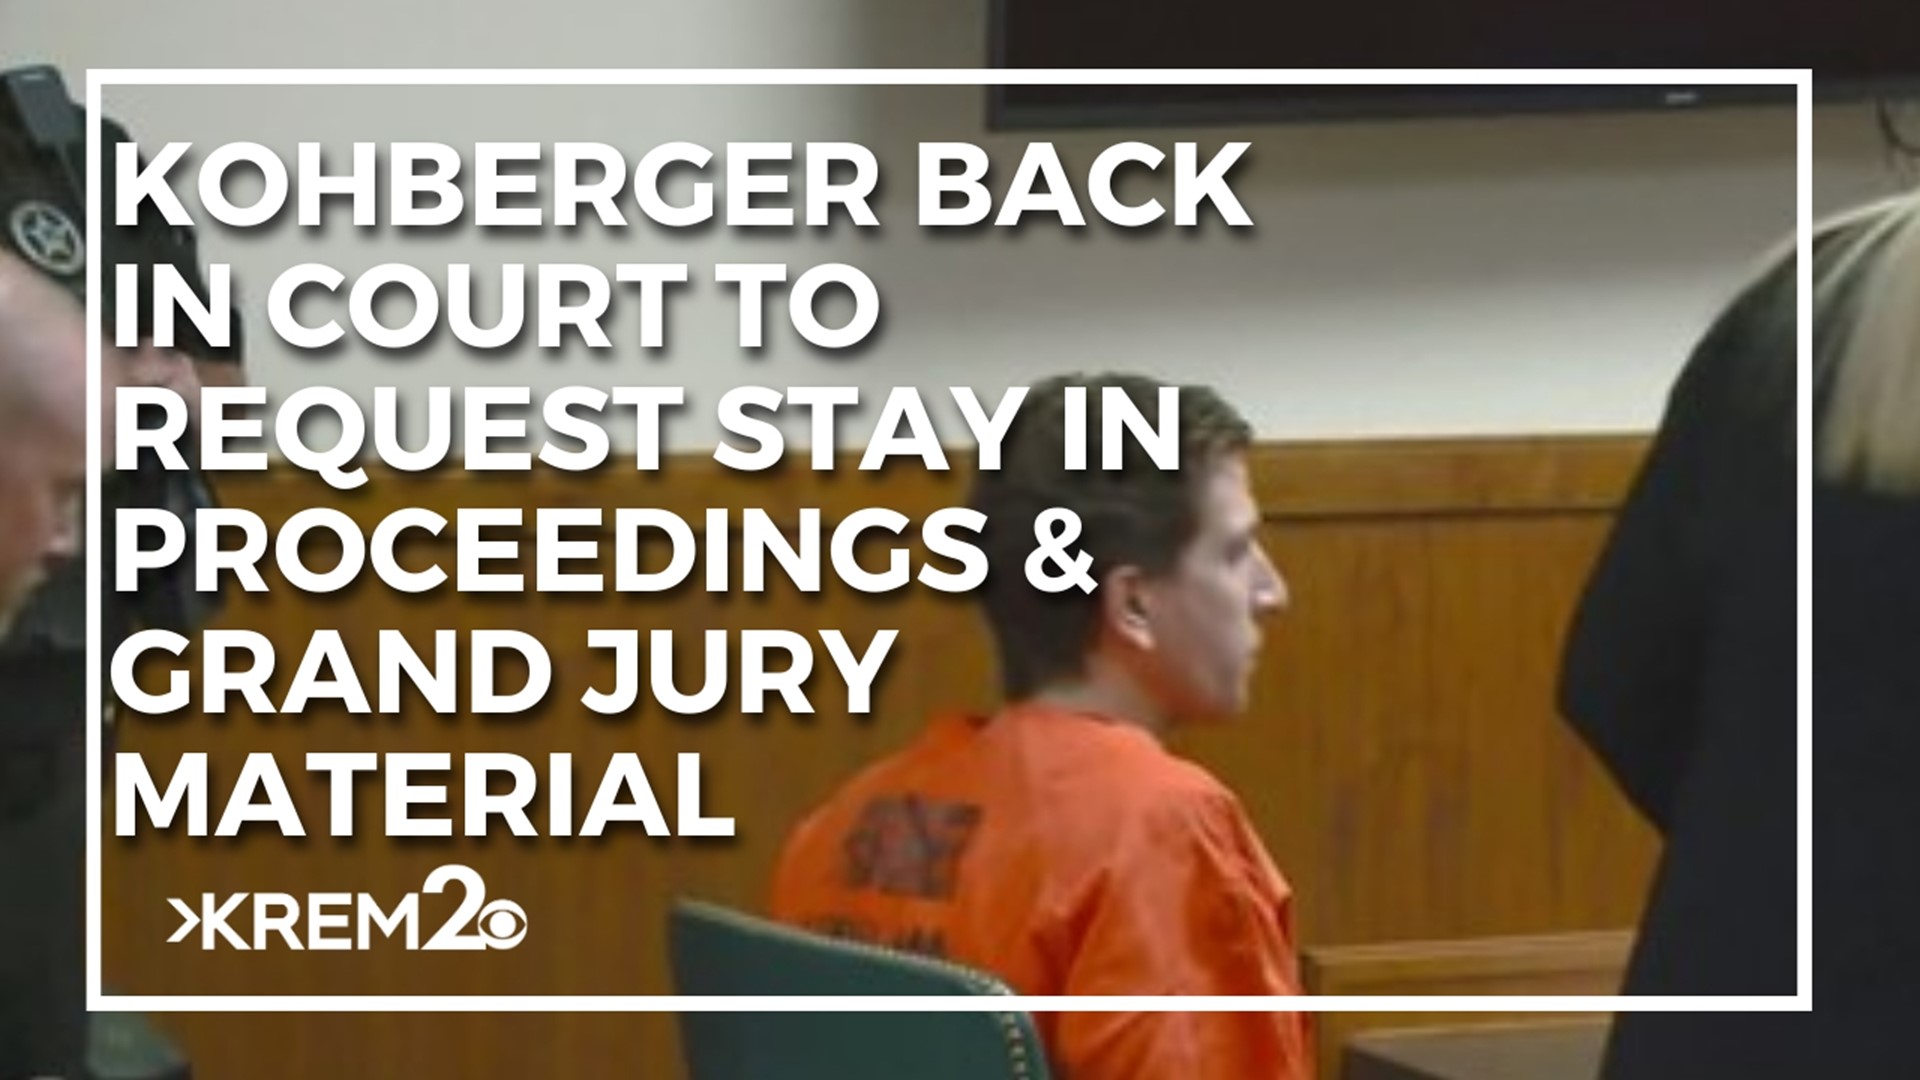 Bryan Kohberger will be in court again on Tuesday; here's what to expect